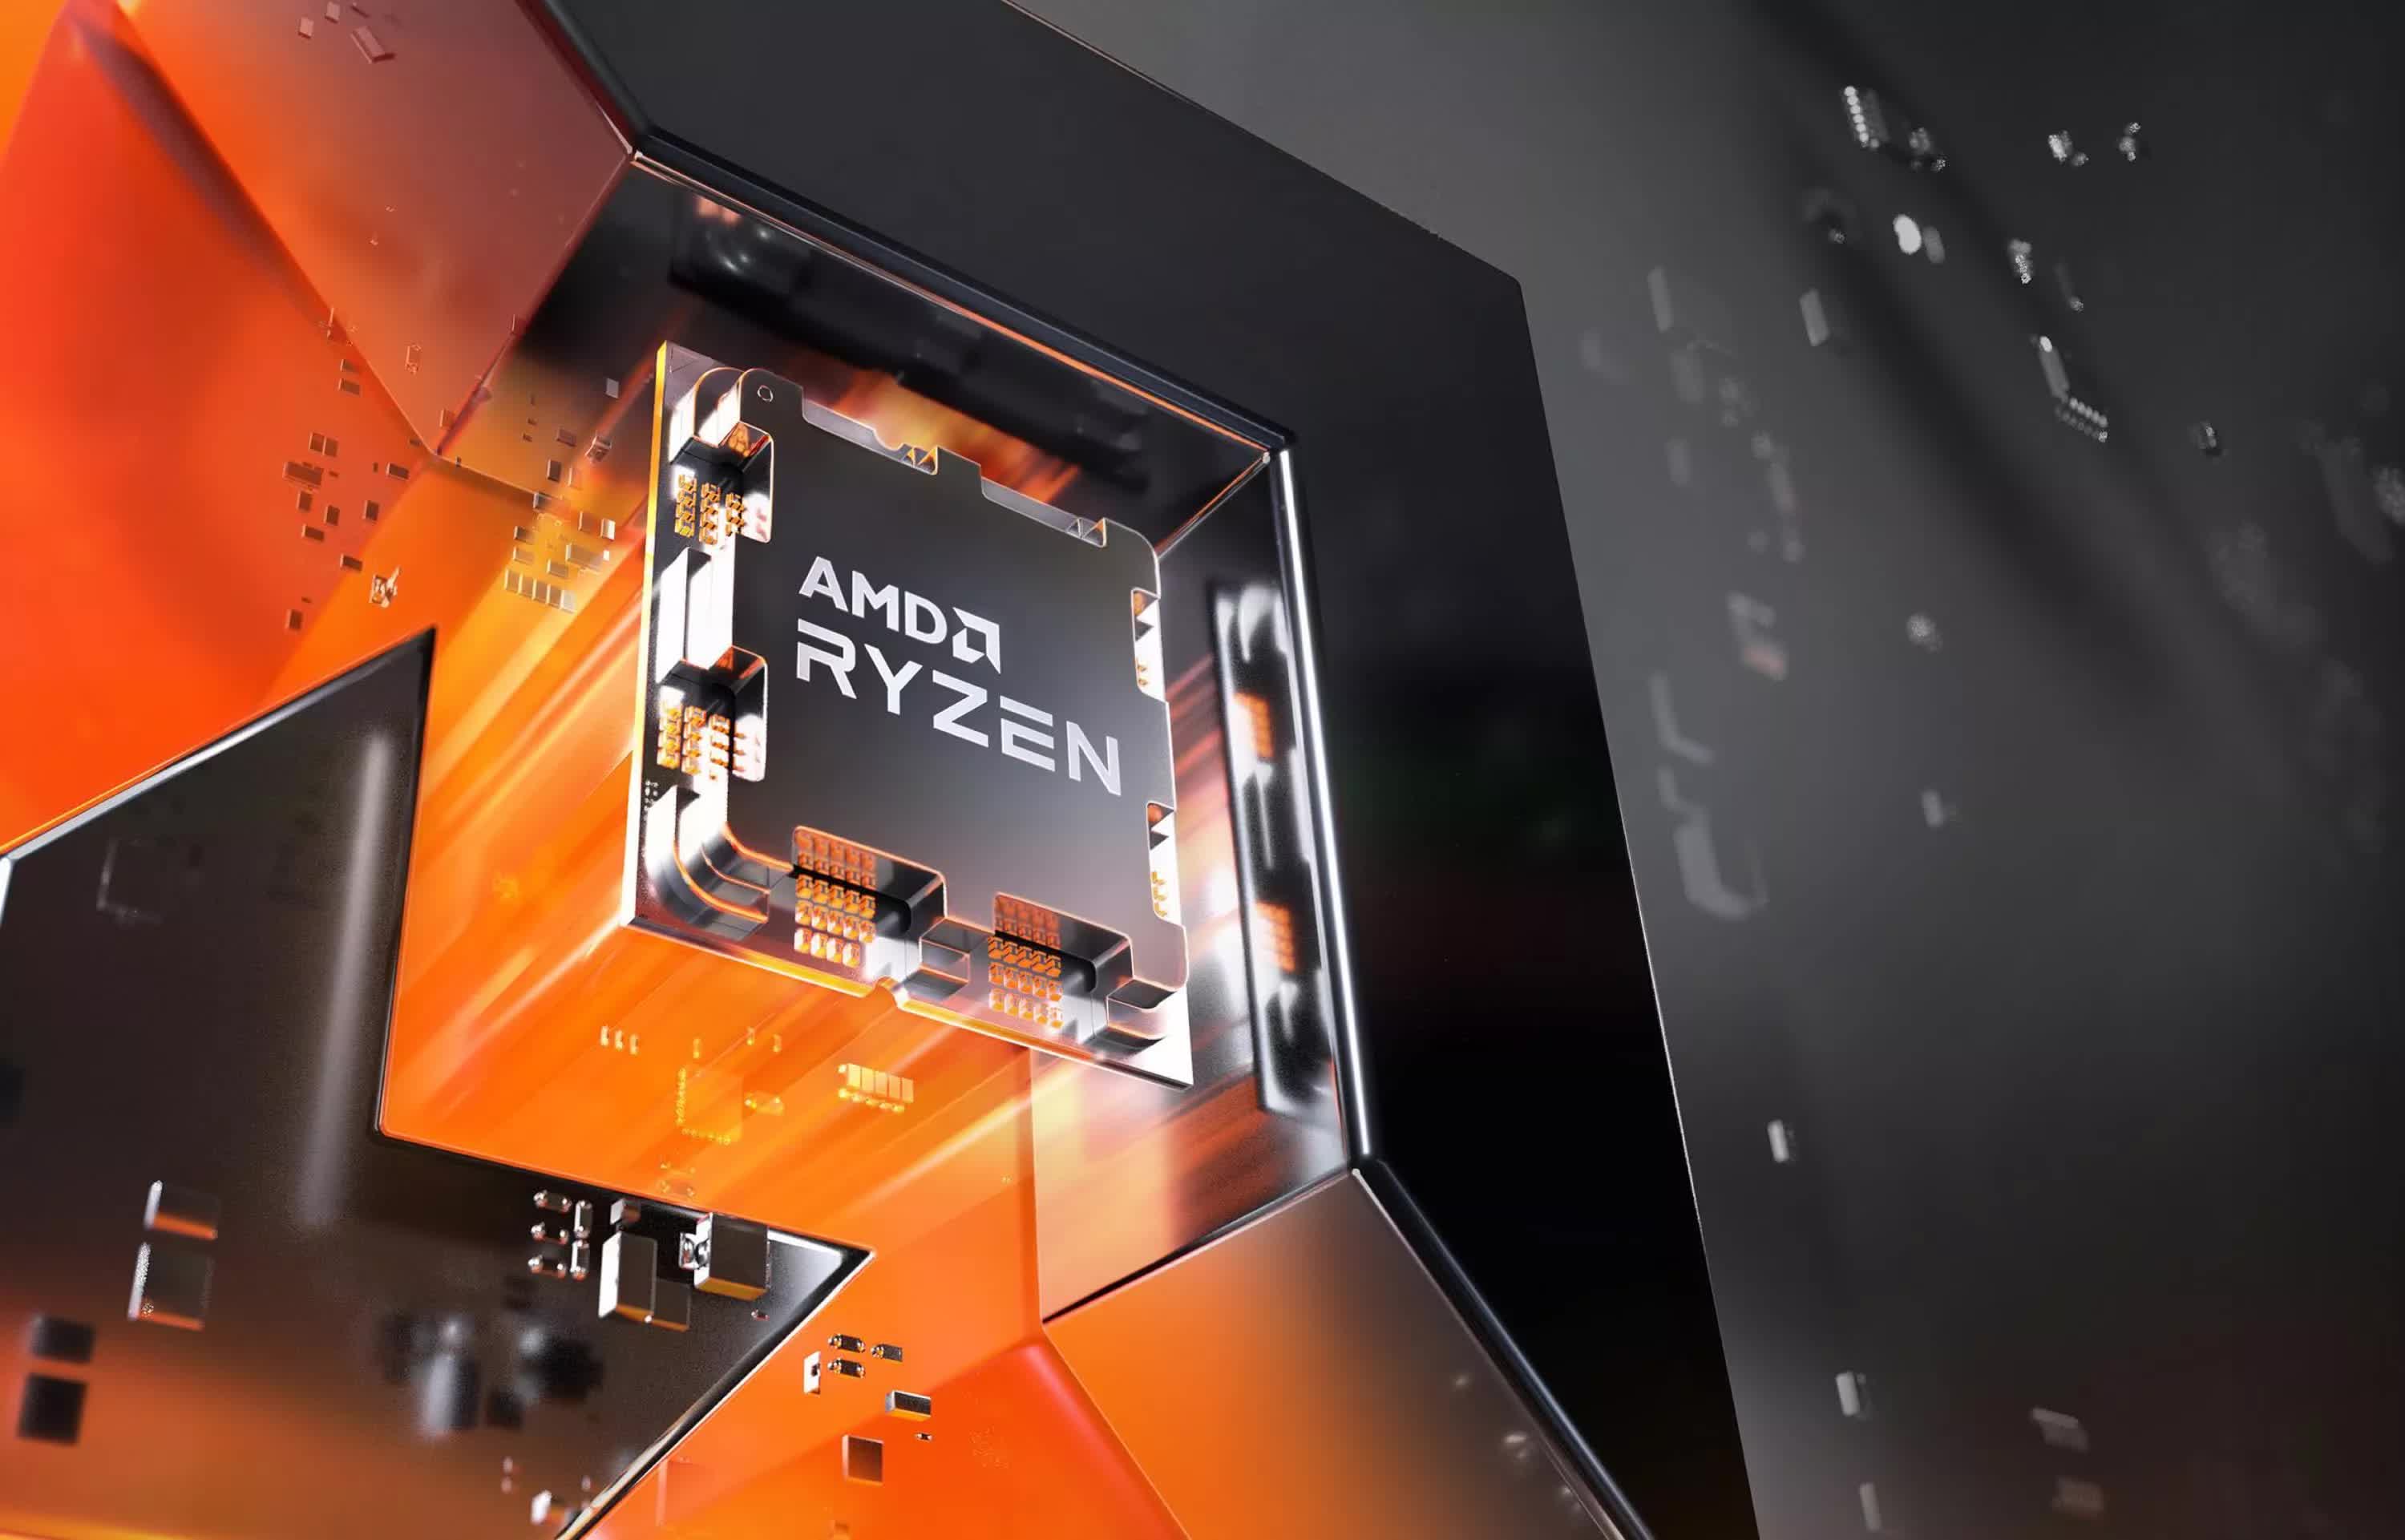 Zen 4 X3D processors may be limited to Ryzen 5 and 7, no Meteor Lake processors in 2023